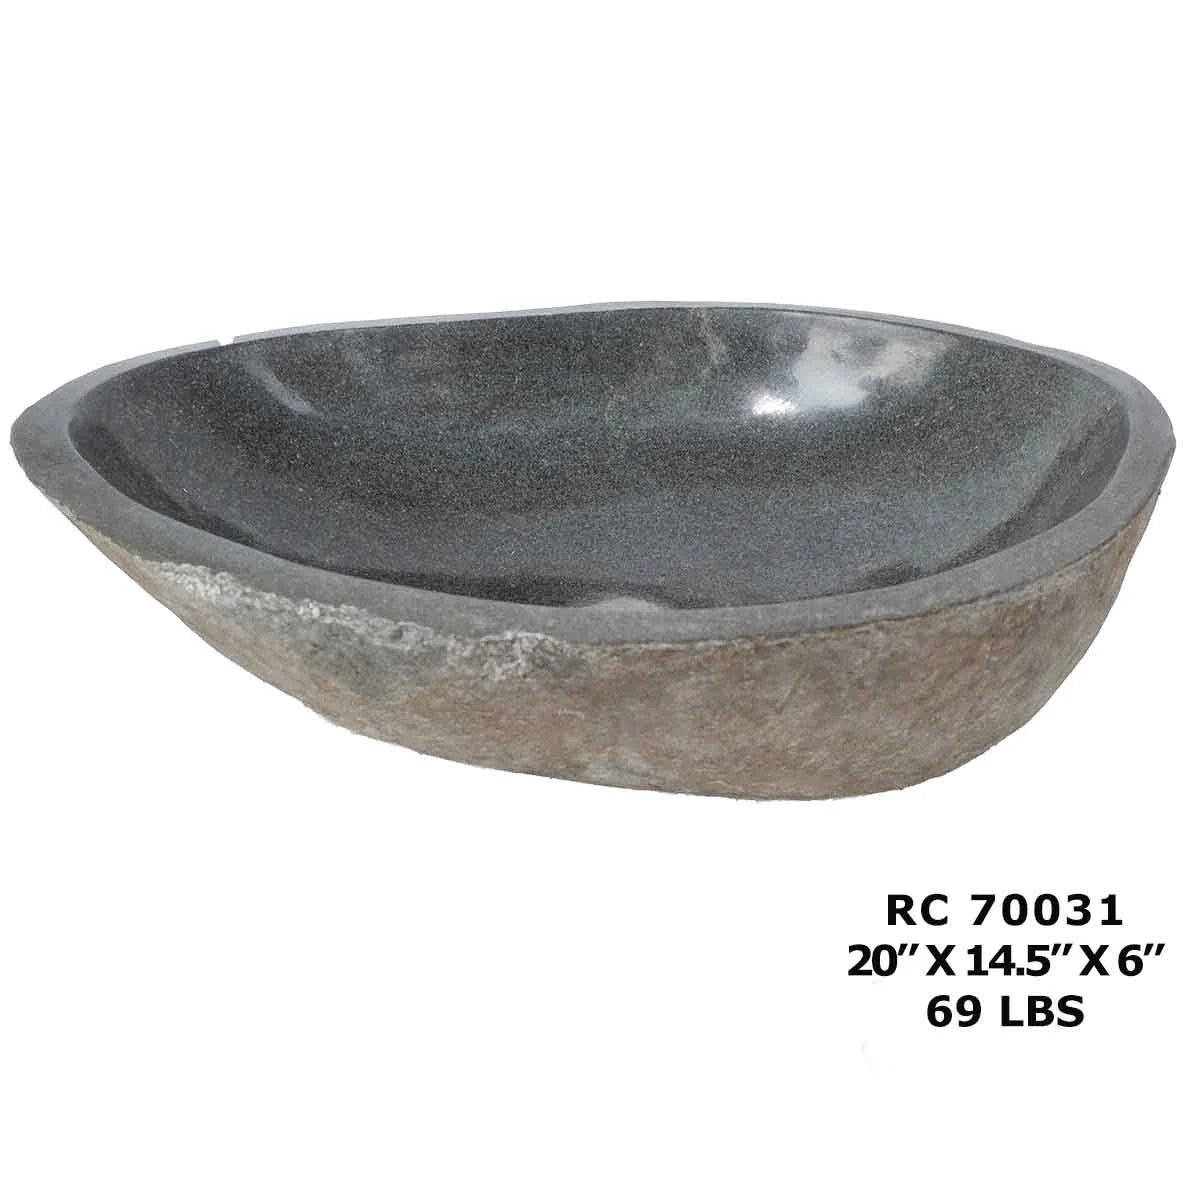 RC70031-Natural River Stone Sink Bowl for Bathroom